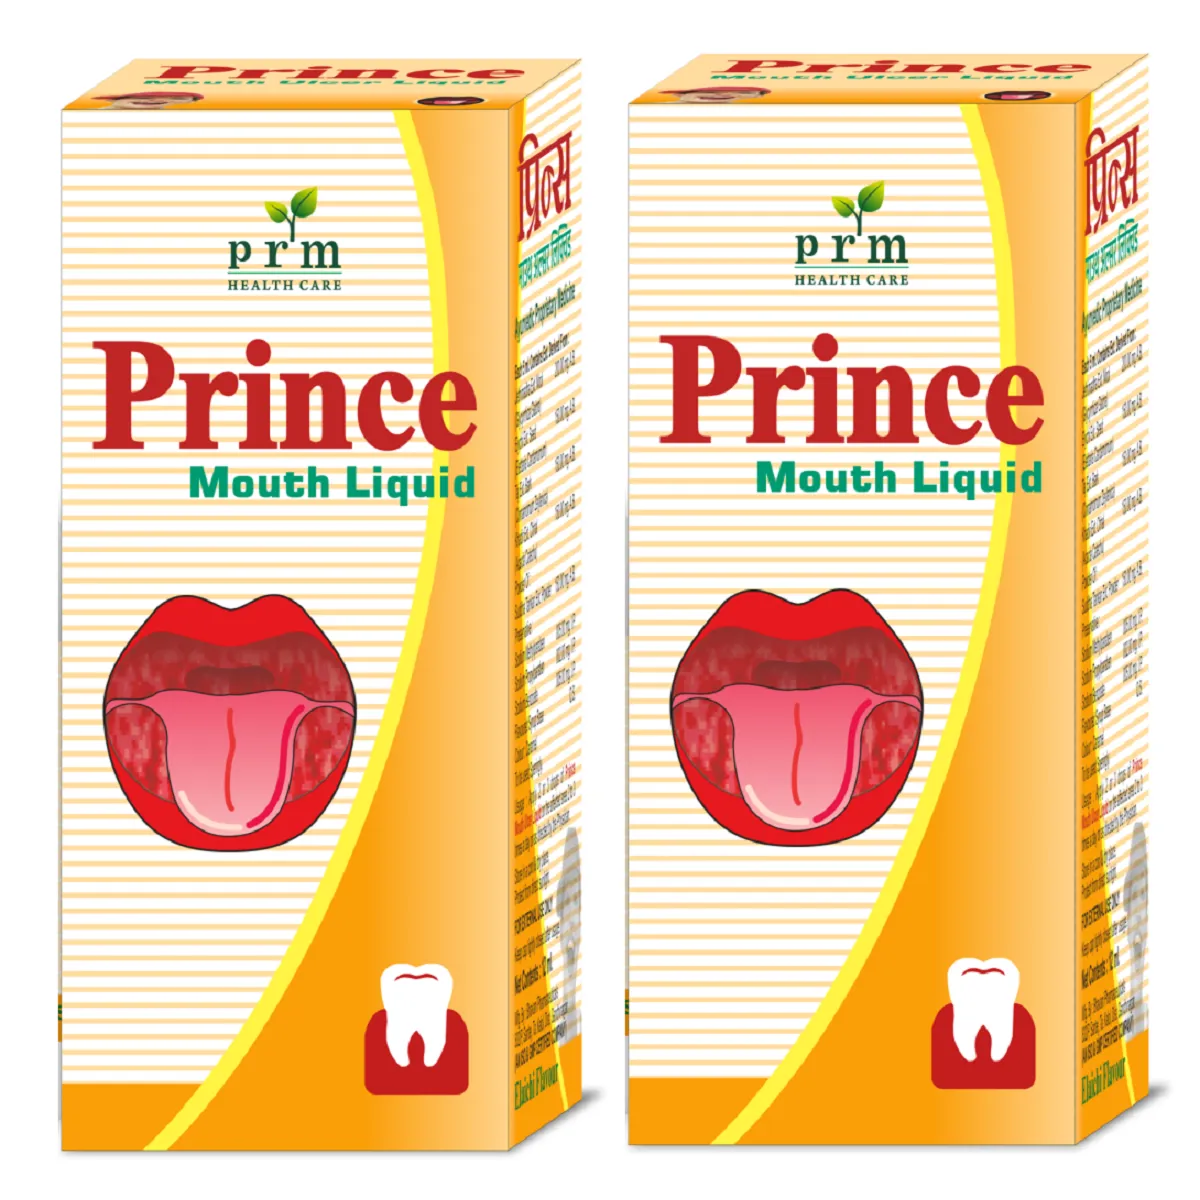 Prm Prince Mouth Liquid 12ml, Pack of 2